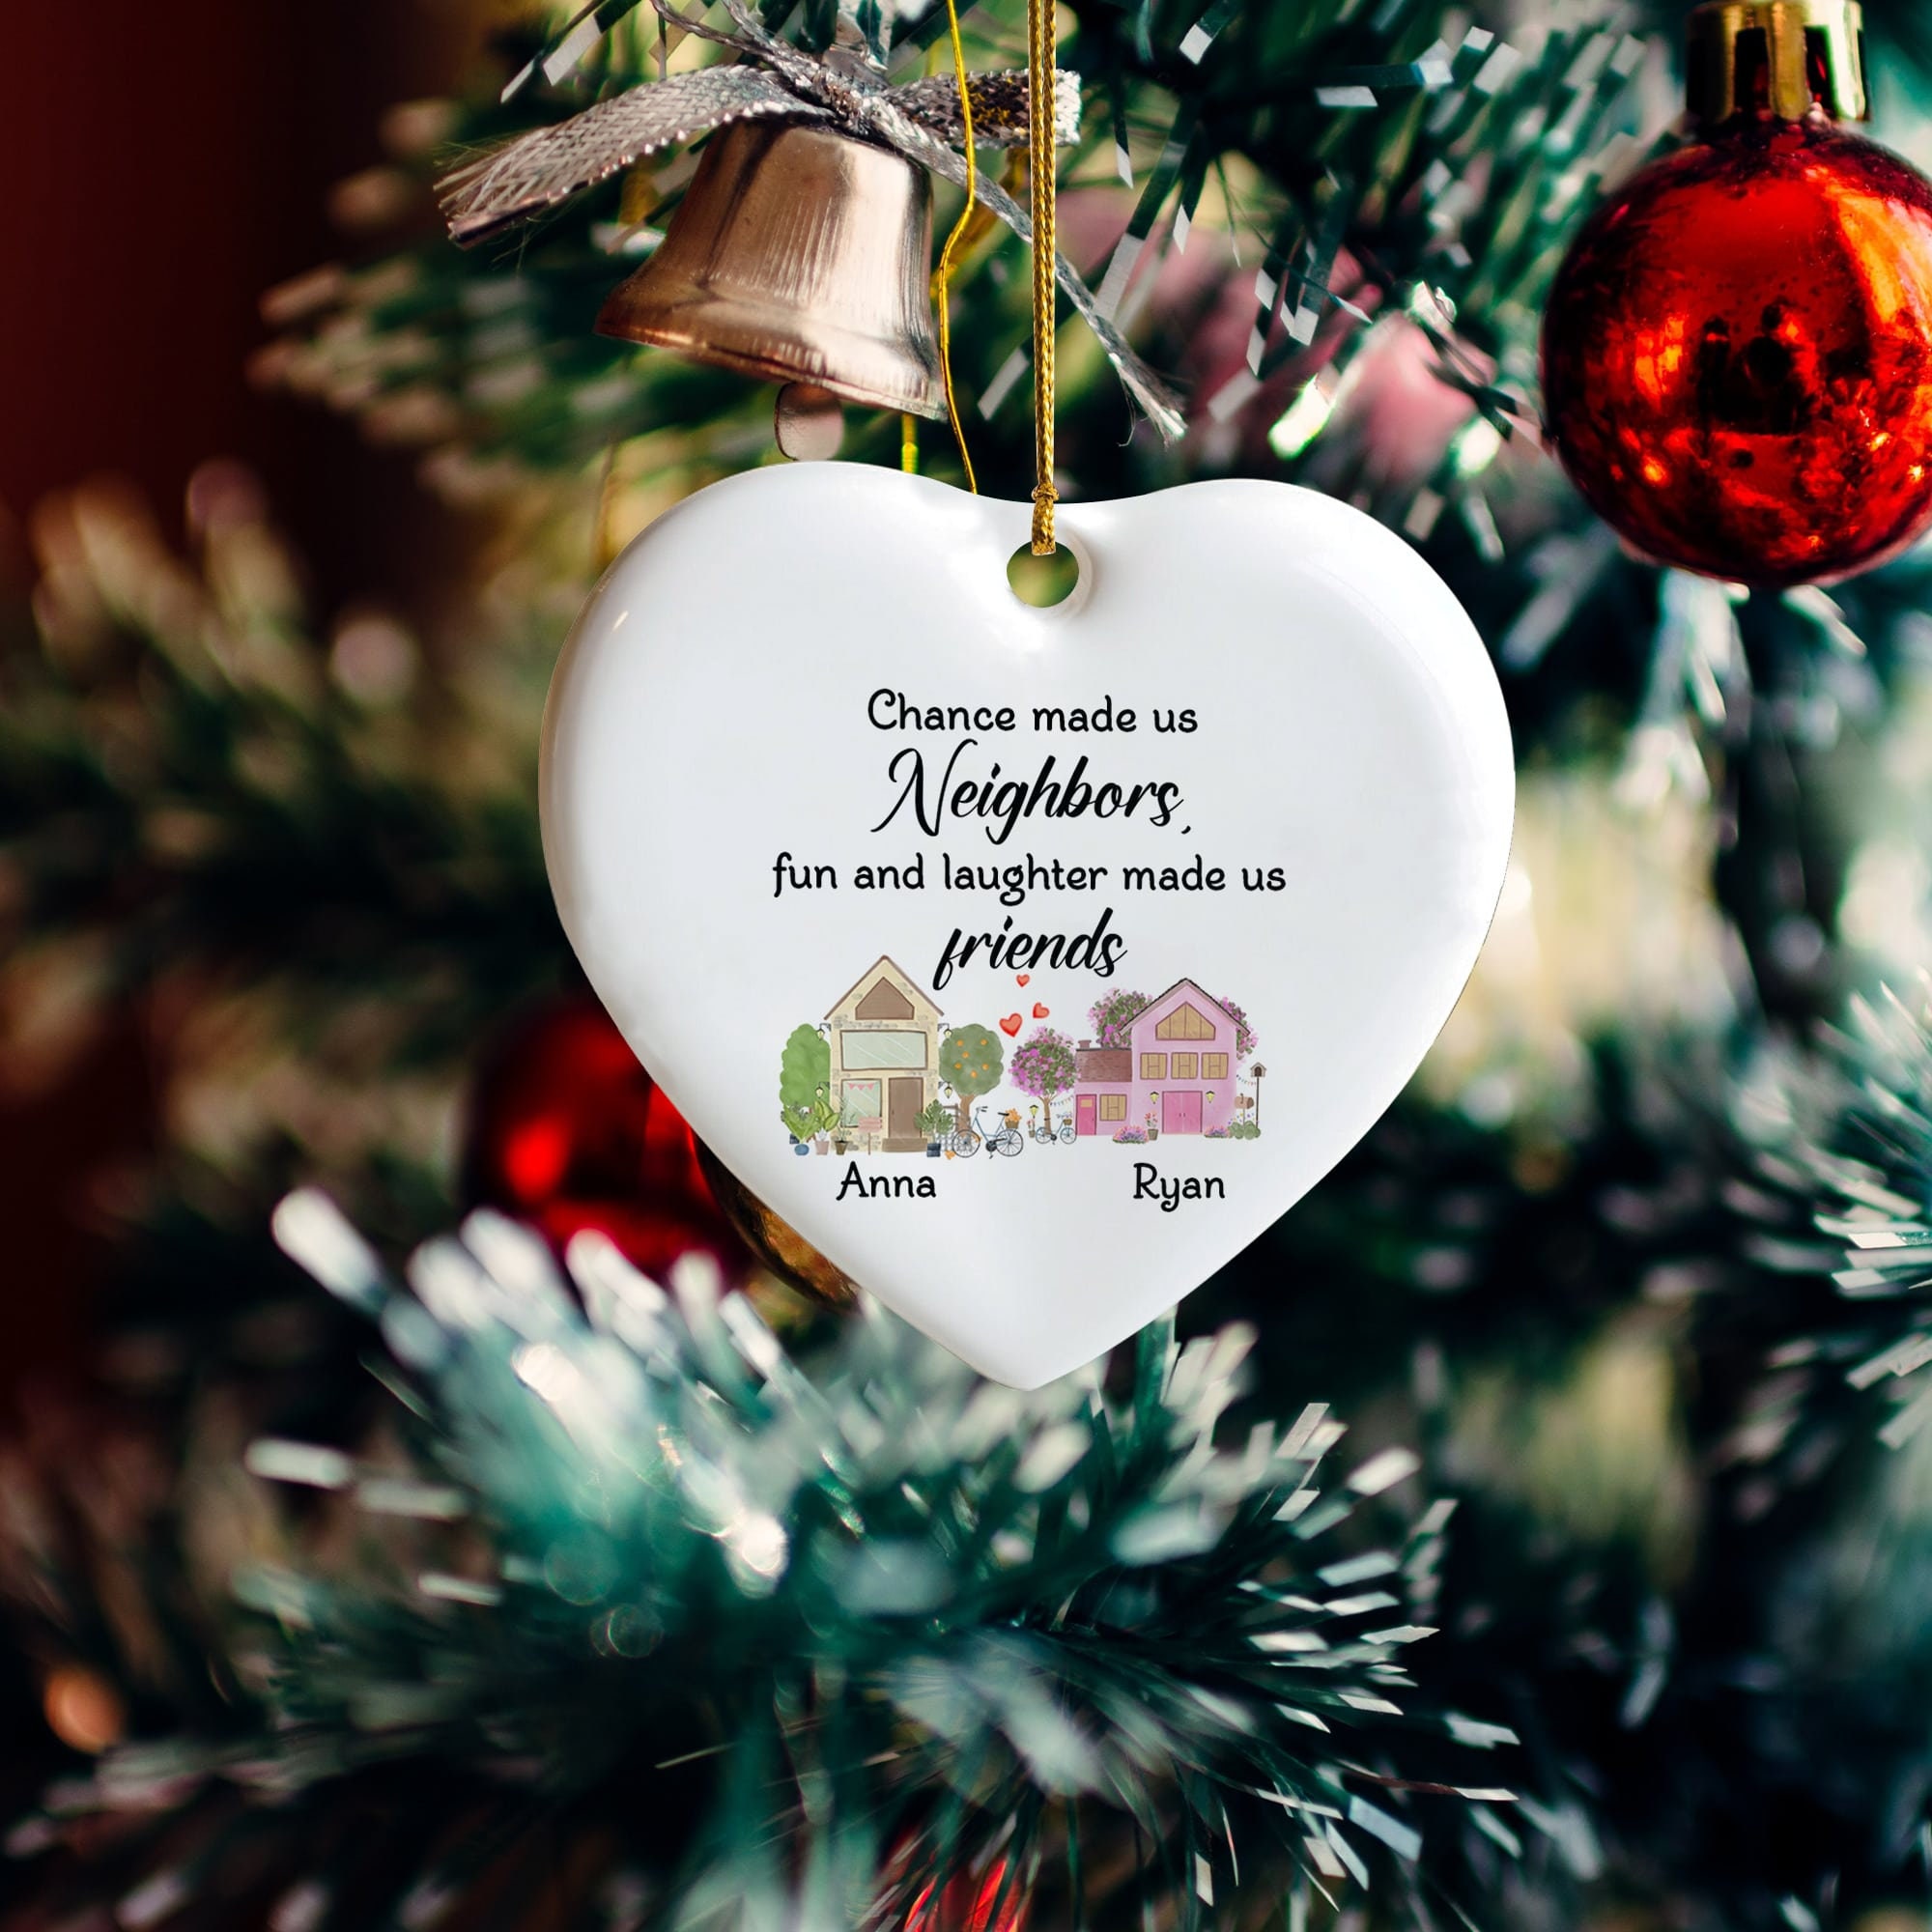 Neighbor Ornament Personalized Chance Made Us Neighbors Hearts Made Us  Friends Christmas Holiday Flat Circle Ornament